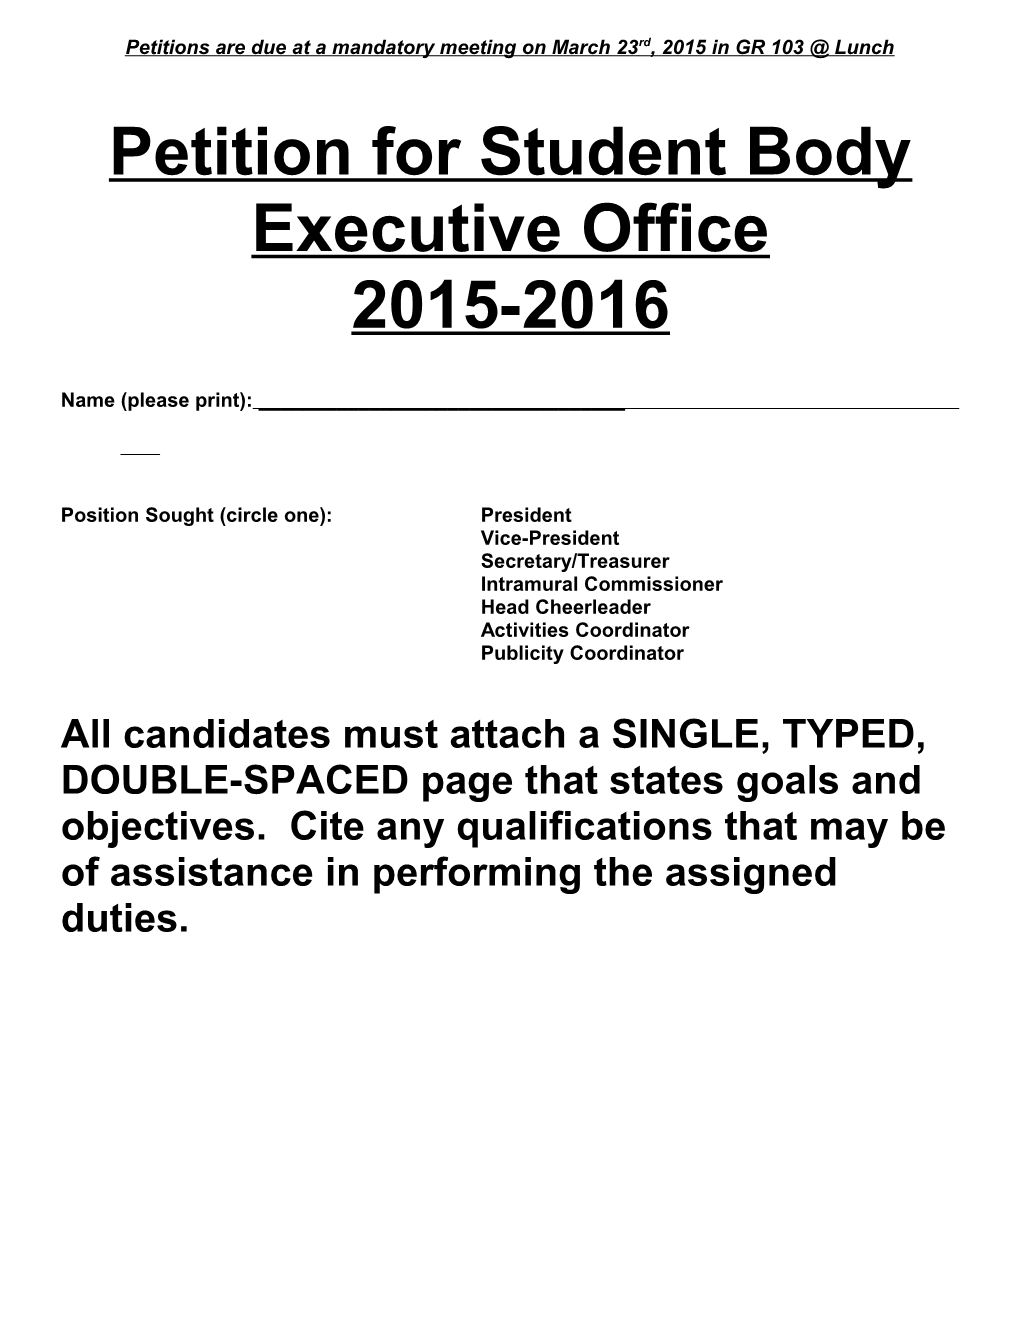 Petition for Student Body Executive Office